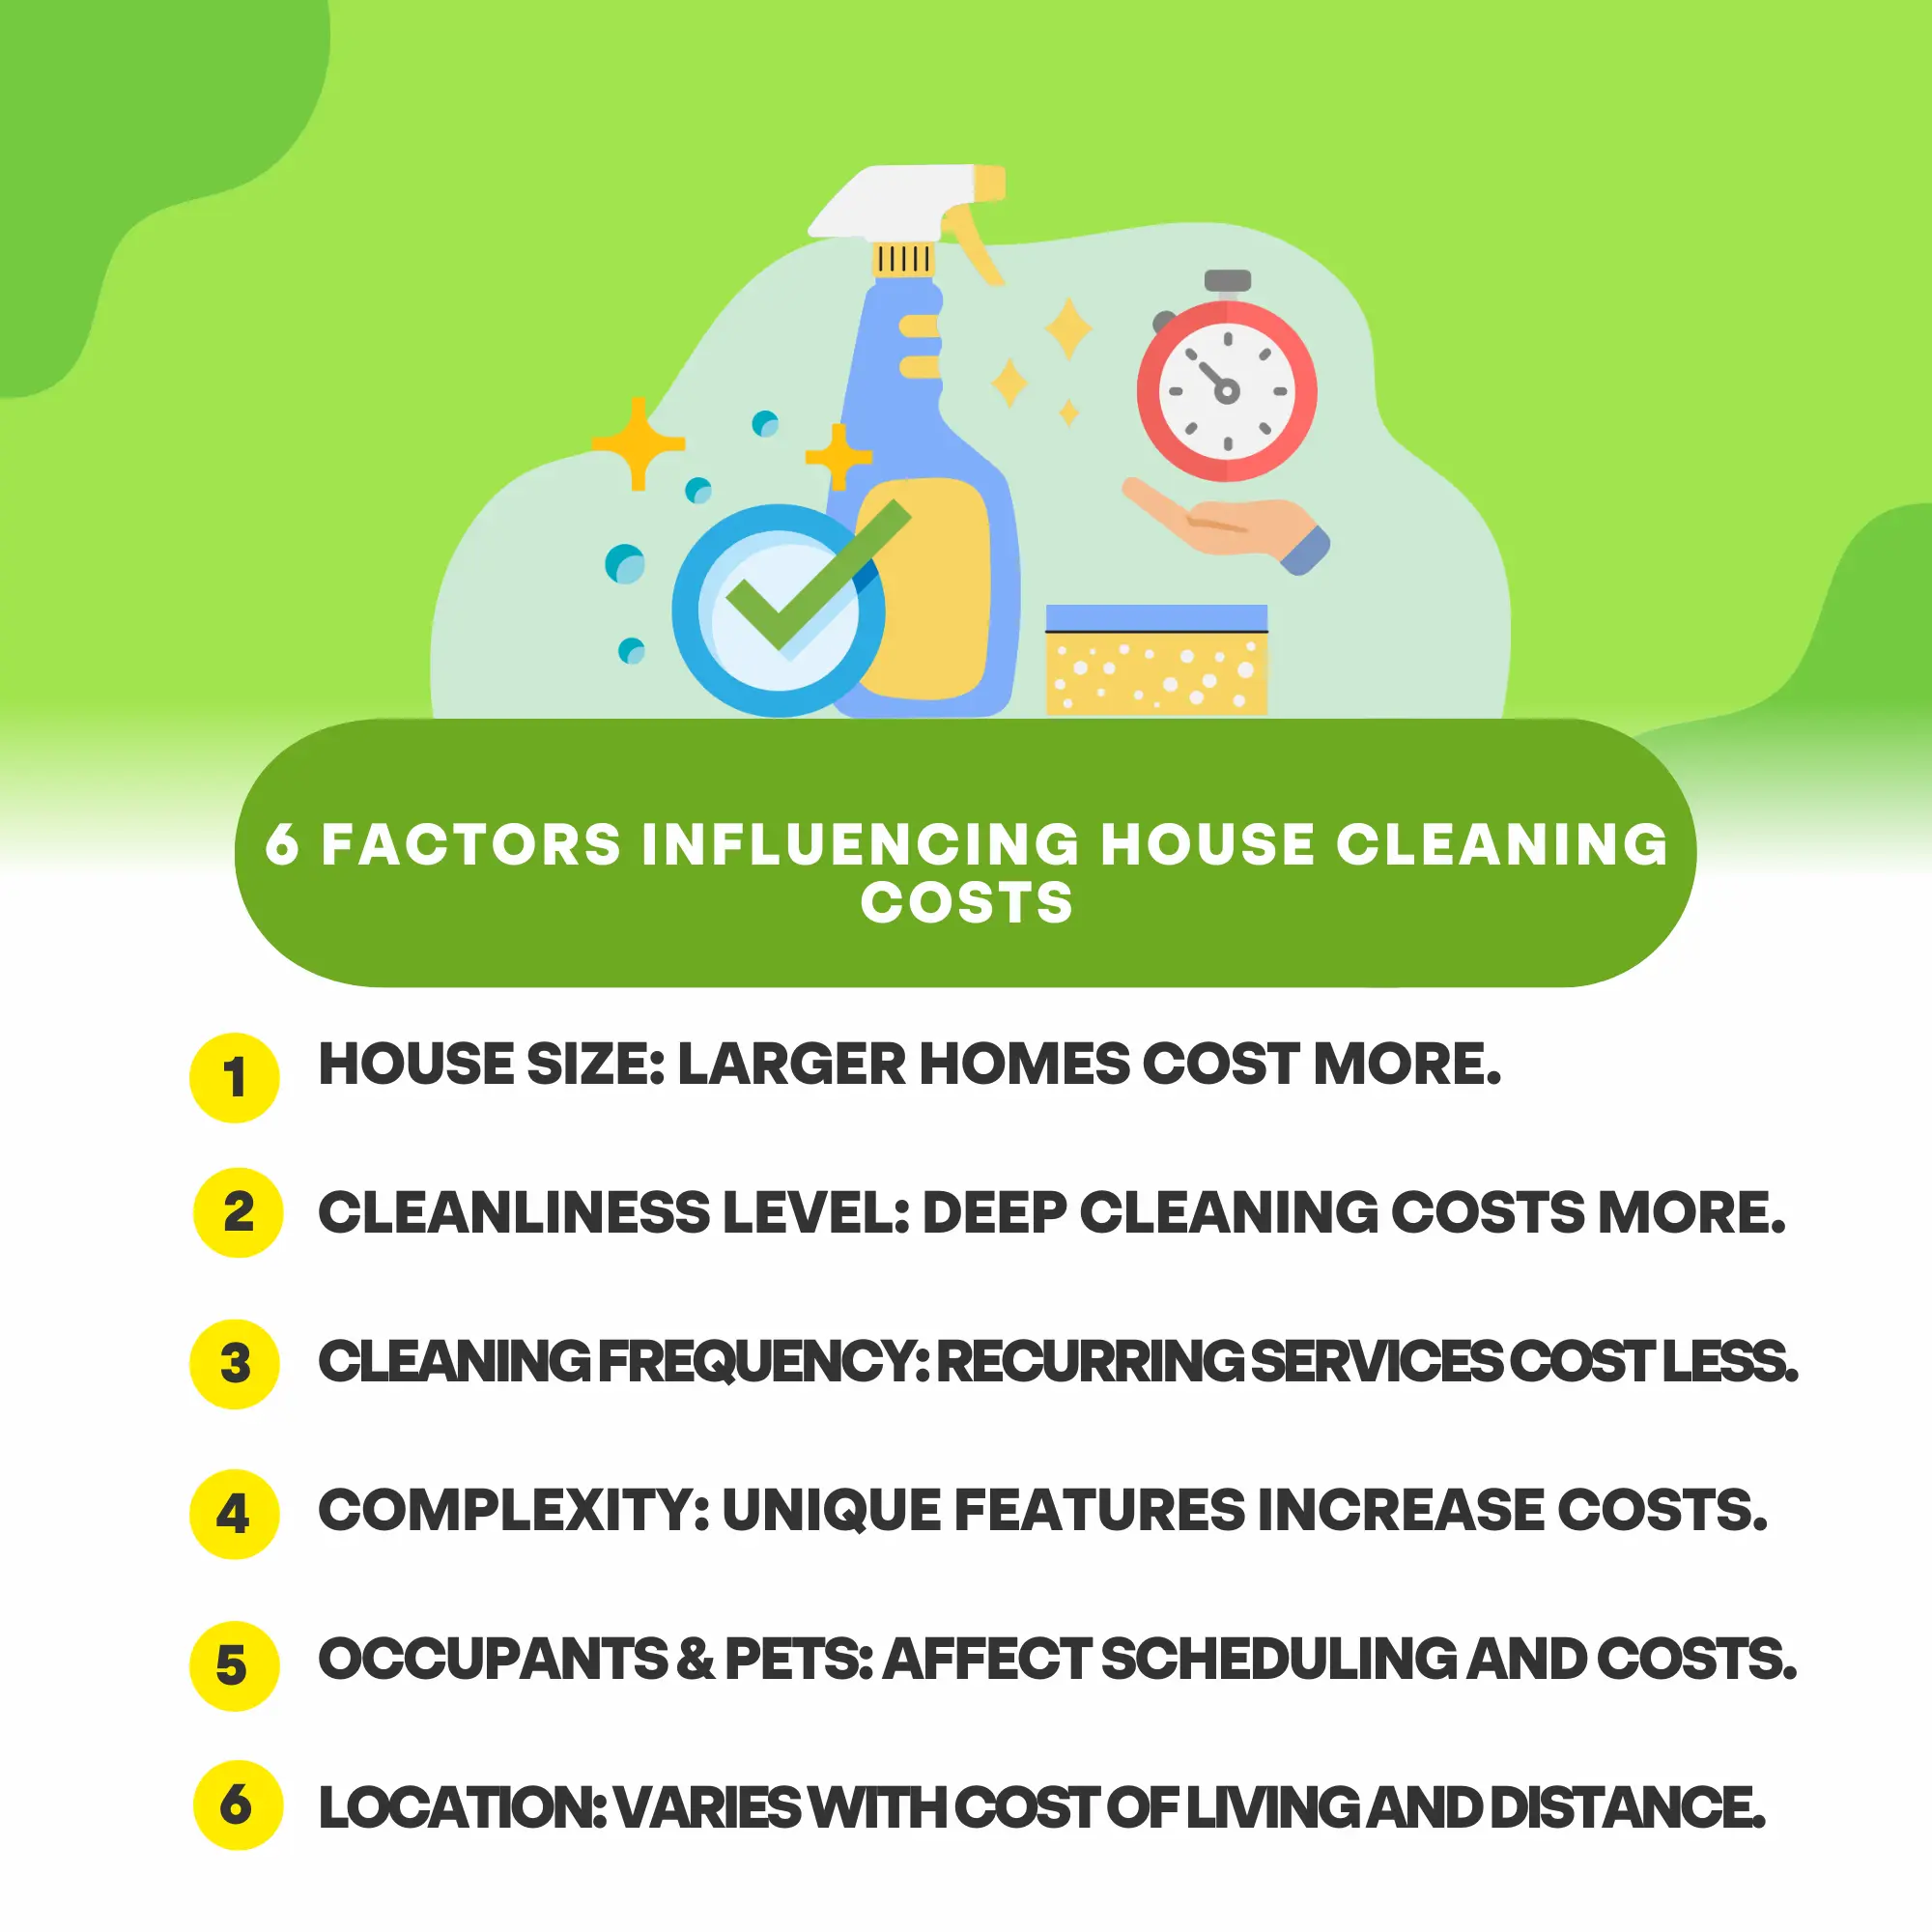 Factors influencing house cleaning costs 